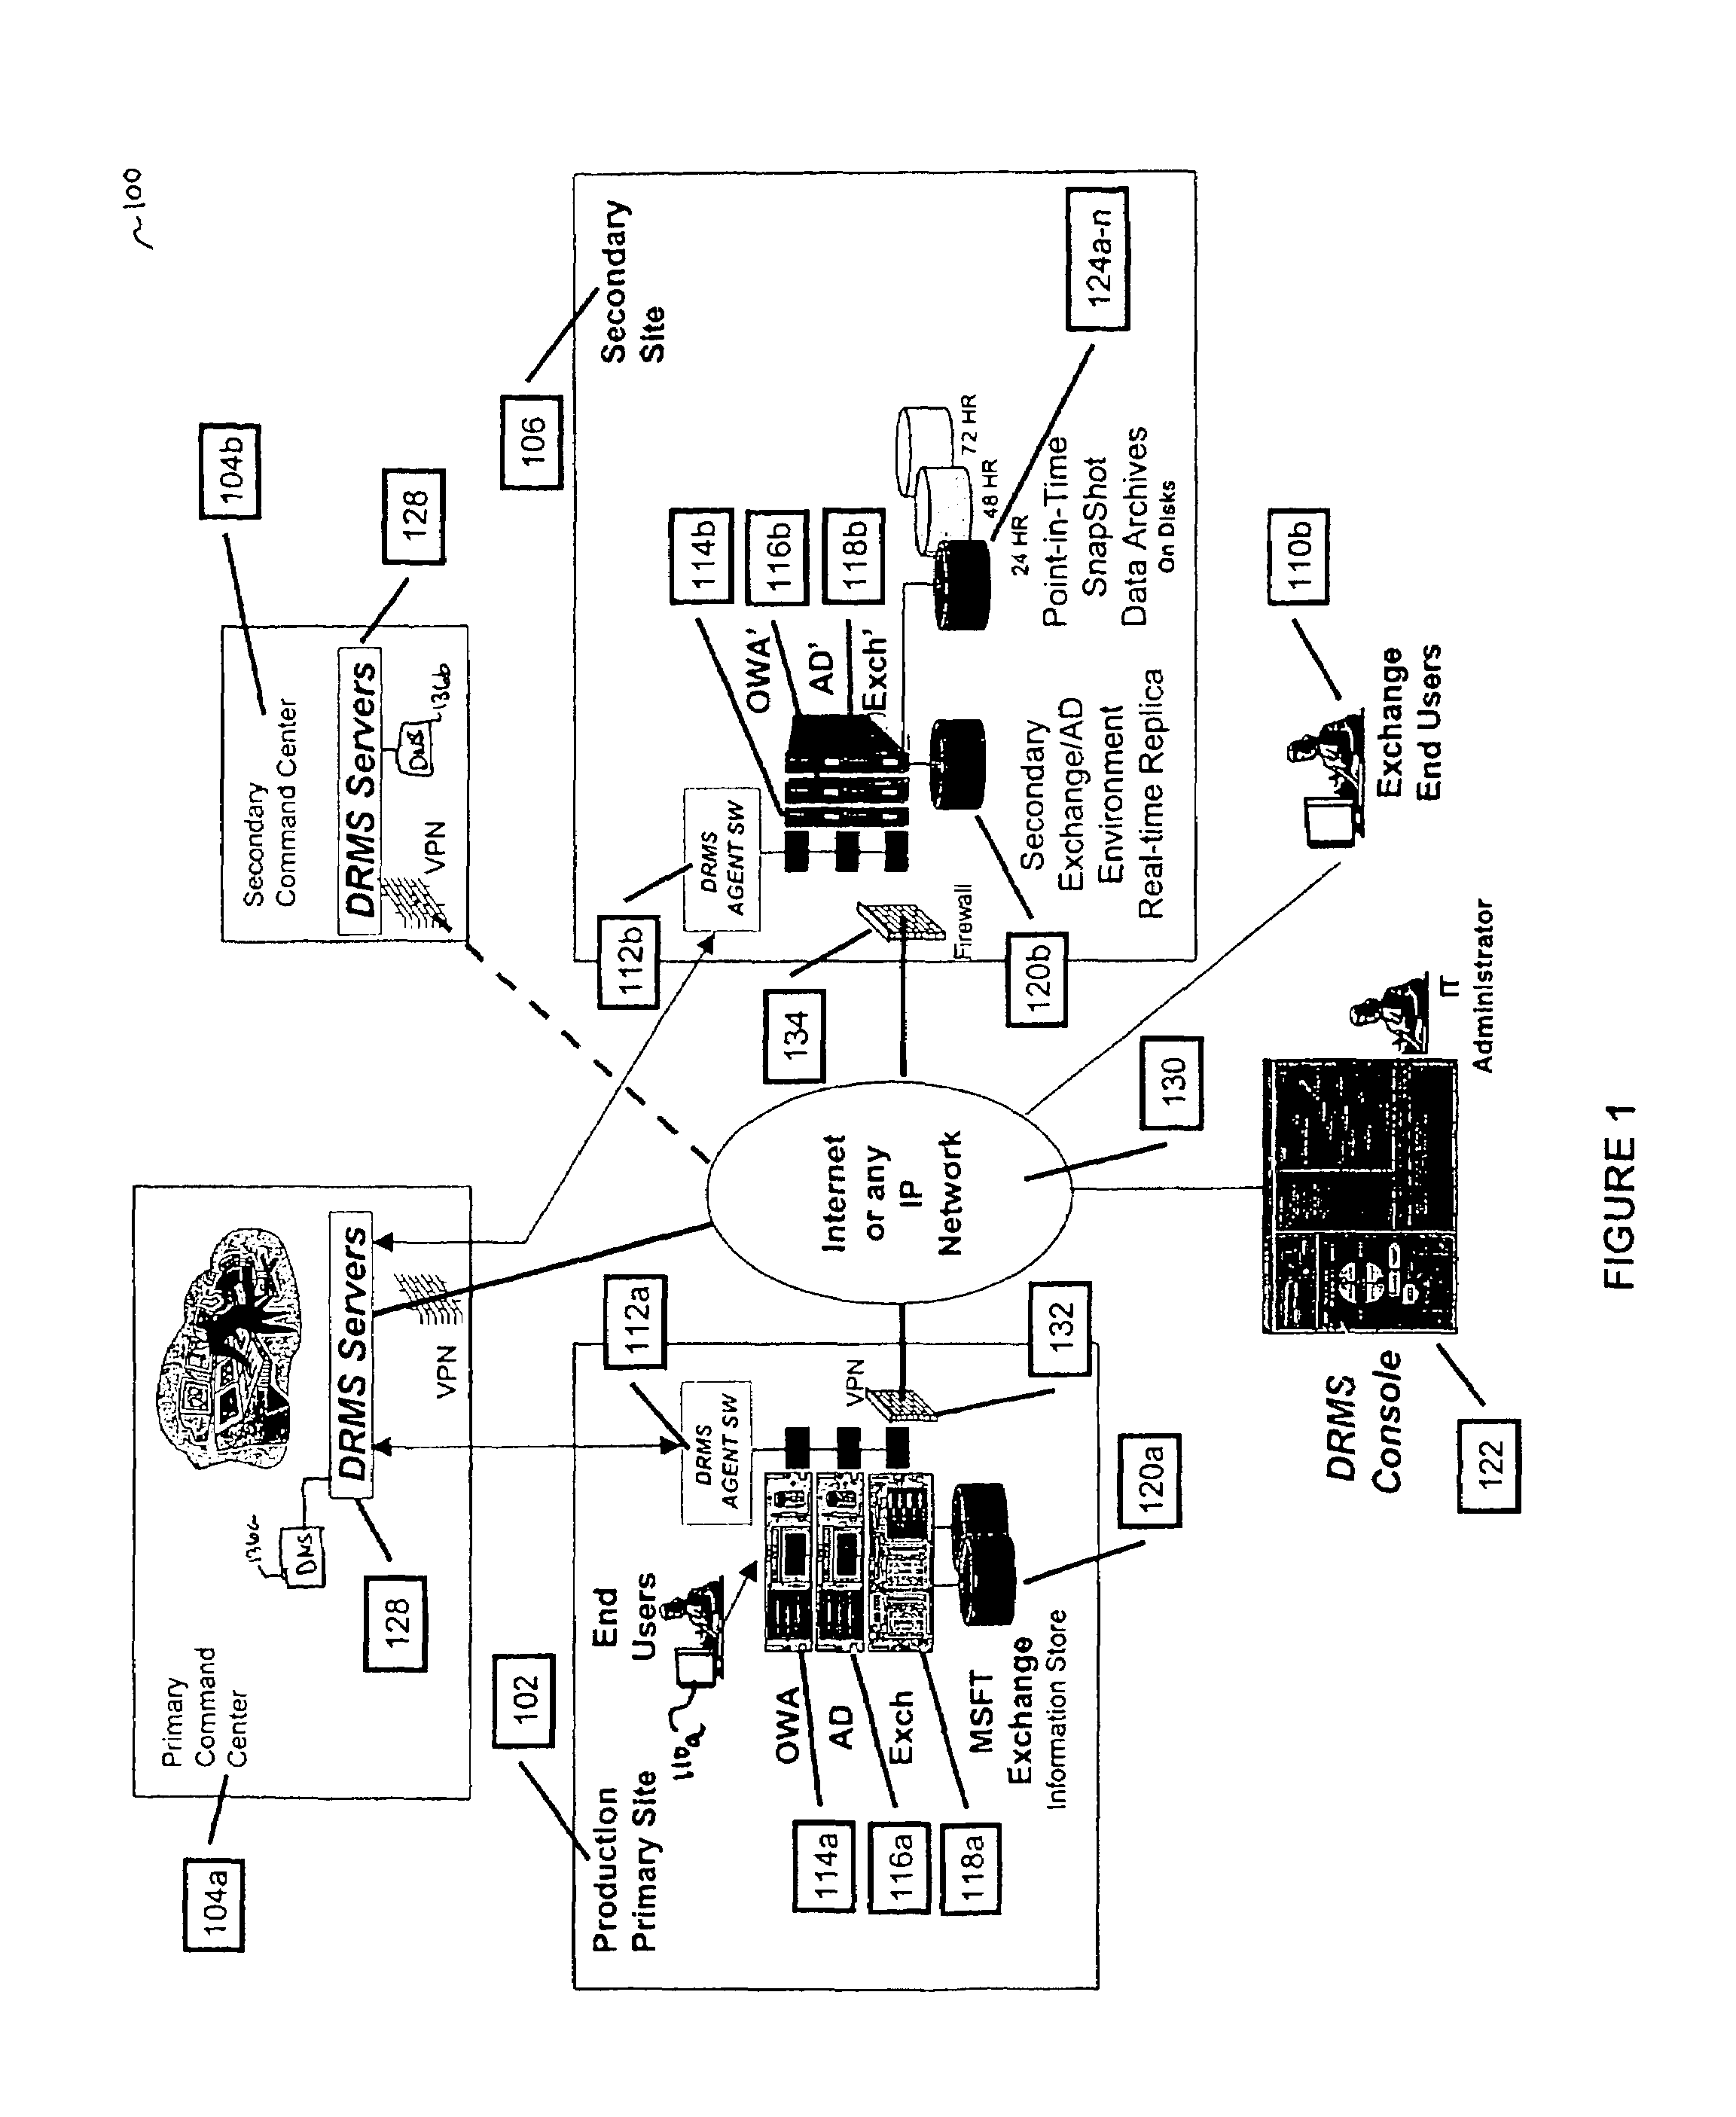 System and method for application monitoring and automatic disaster recovery for high-availability